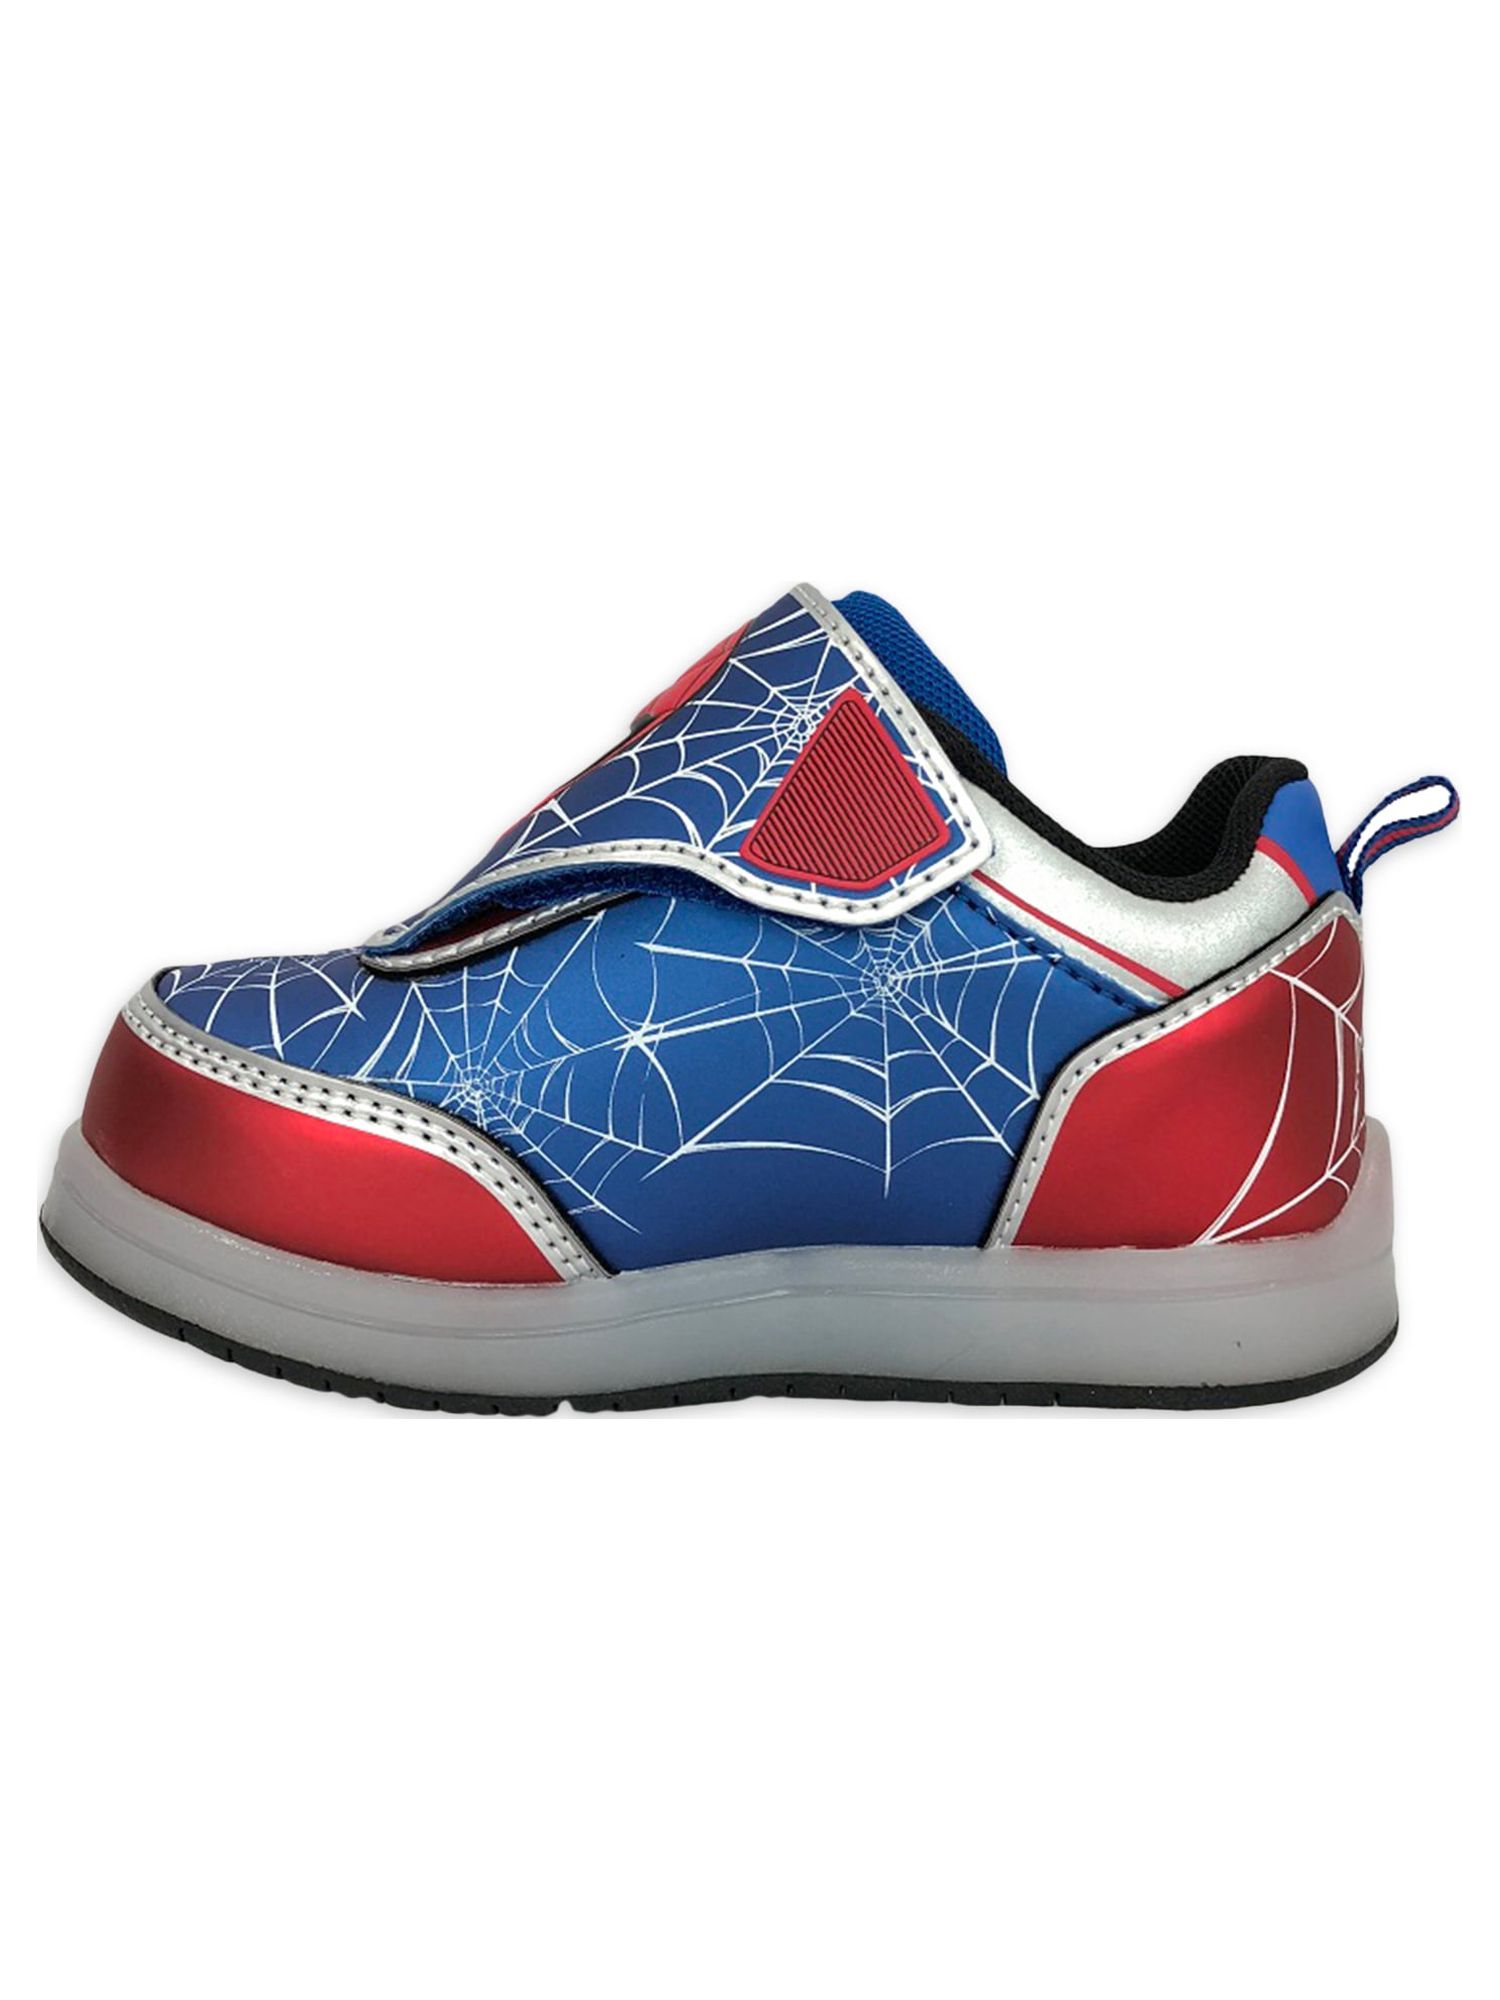 Spider-Man Toddler Boys License Light Up Casual Shoe, Sizes 7-13 - image 2 of 7